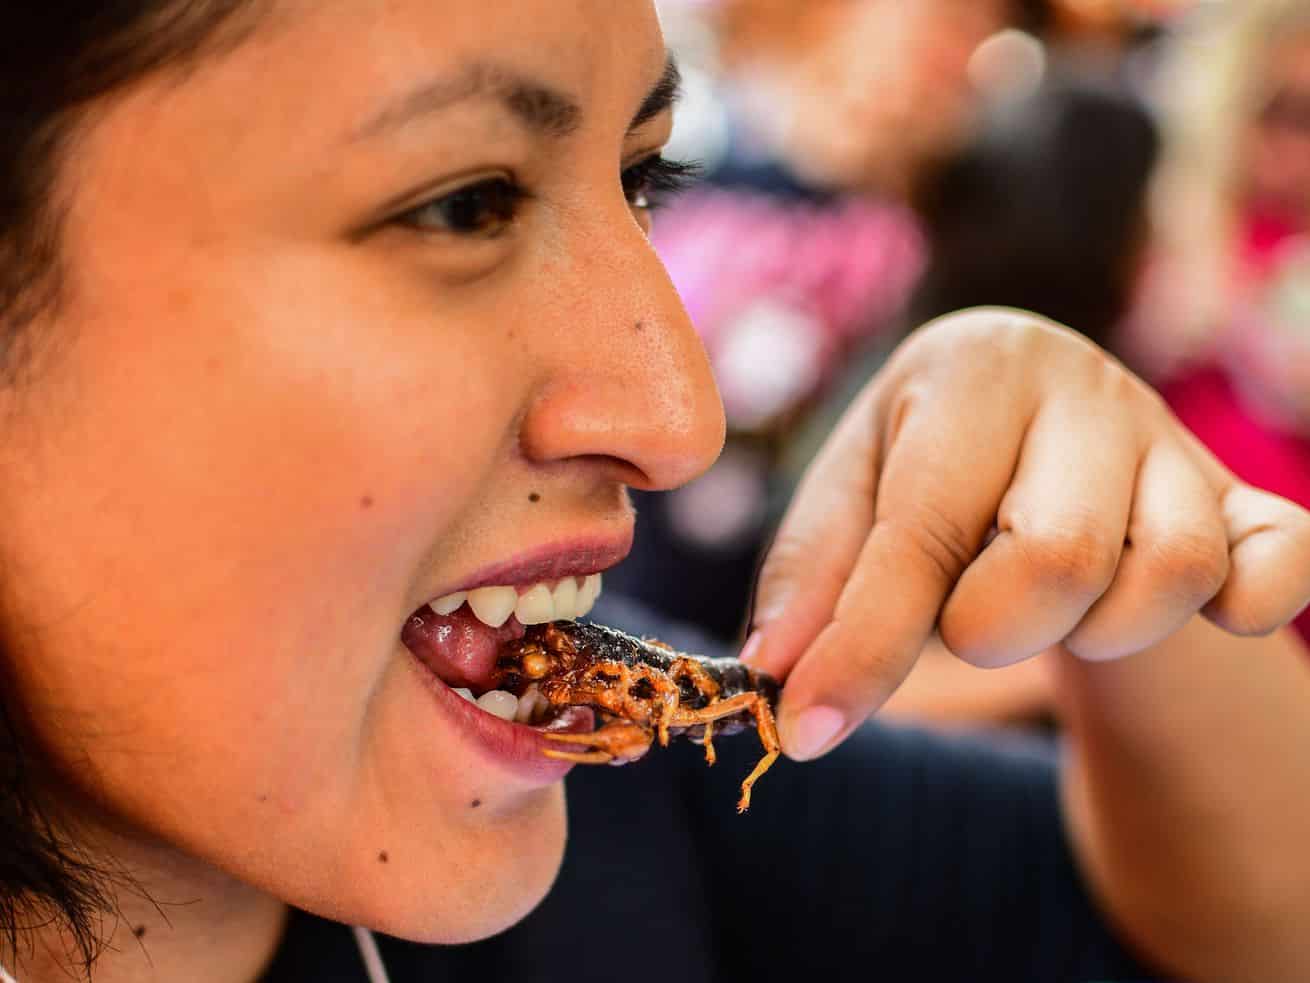 Can insects become a bigger part of humanity’s diet? Should they?